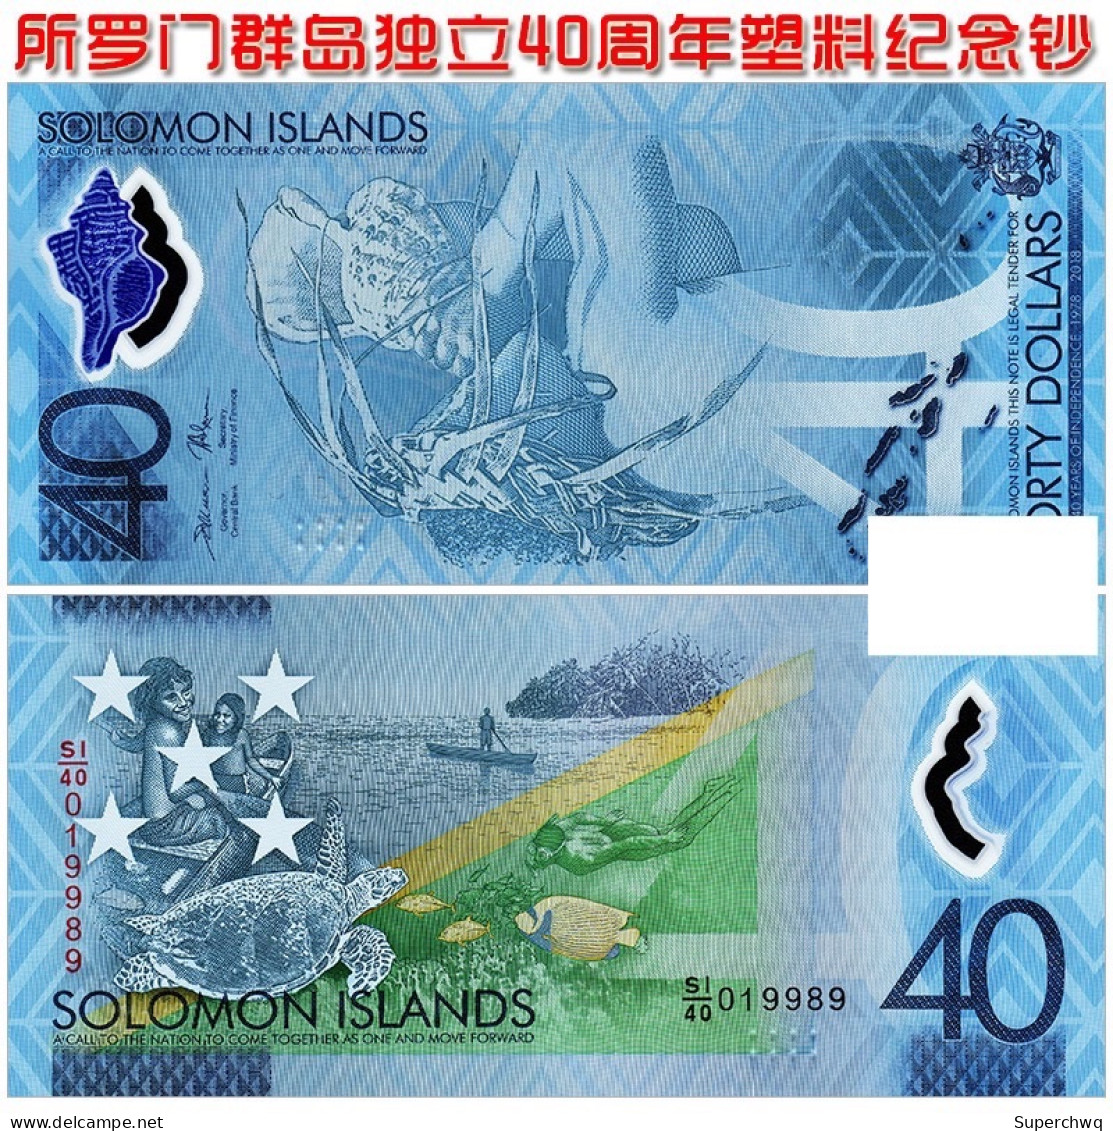 Oceania Solomon Islands 40 Yuan 2018 Independence 40th Anniversary Plastic Commemorative Note， Approximately 145 X67mm I - Isola Salomon